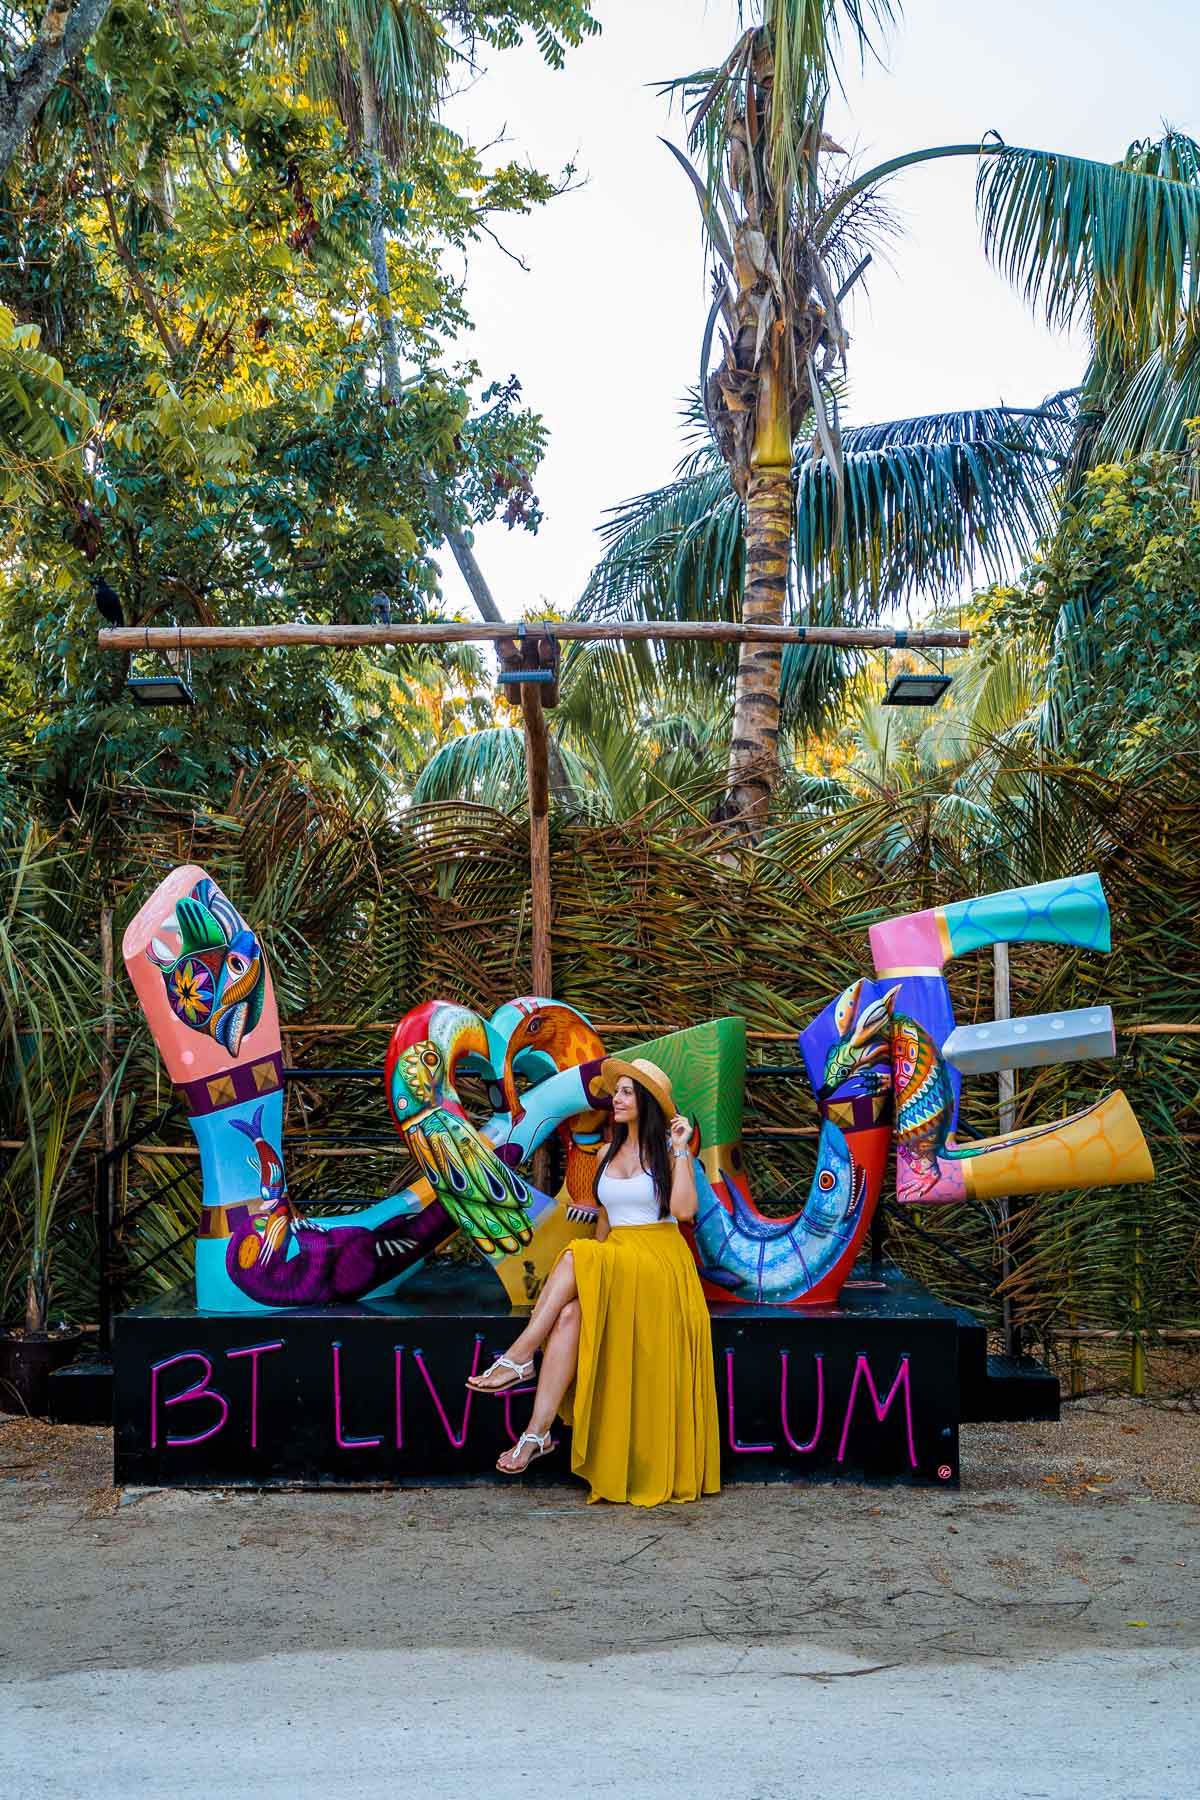 Girl in yellow skirt sitting at the Love sign at BT Live Tulum